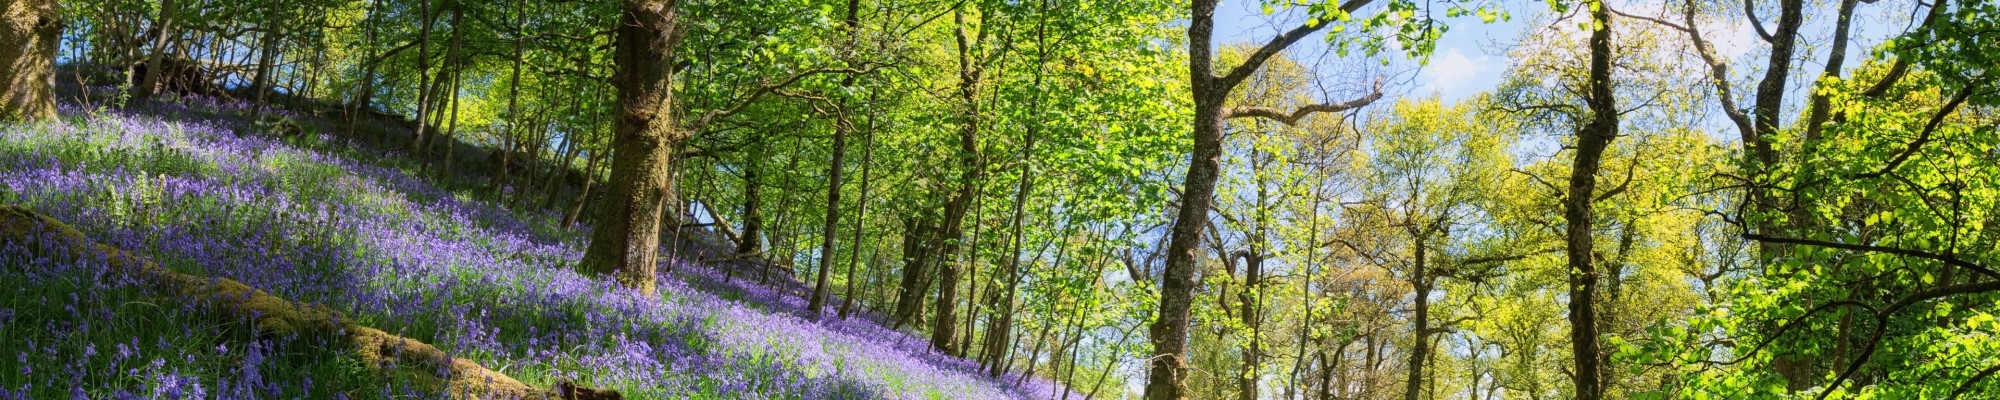 forest image with purple flowers